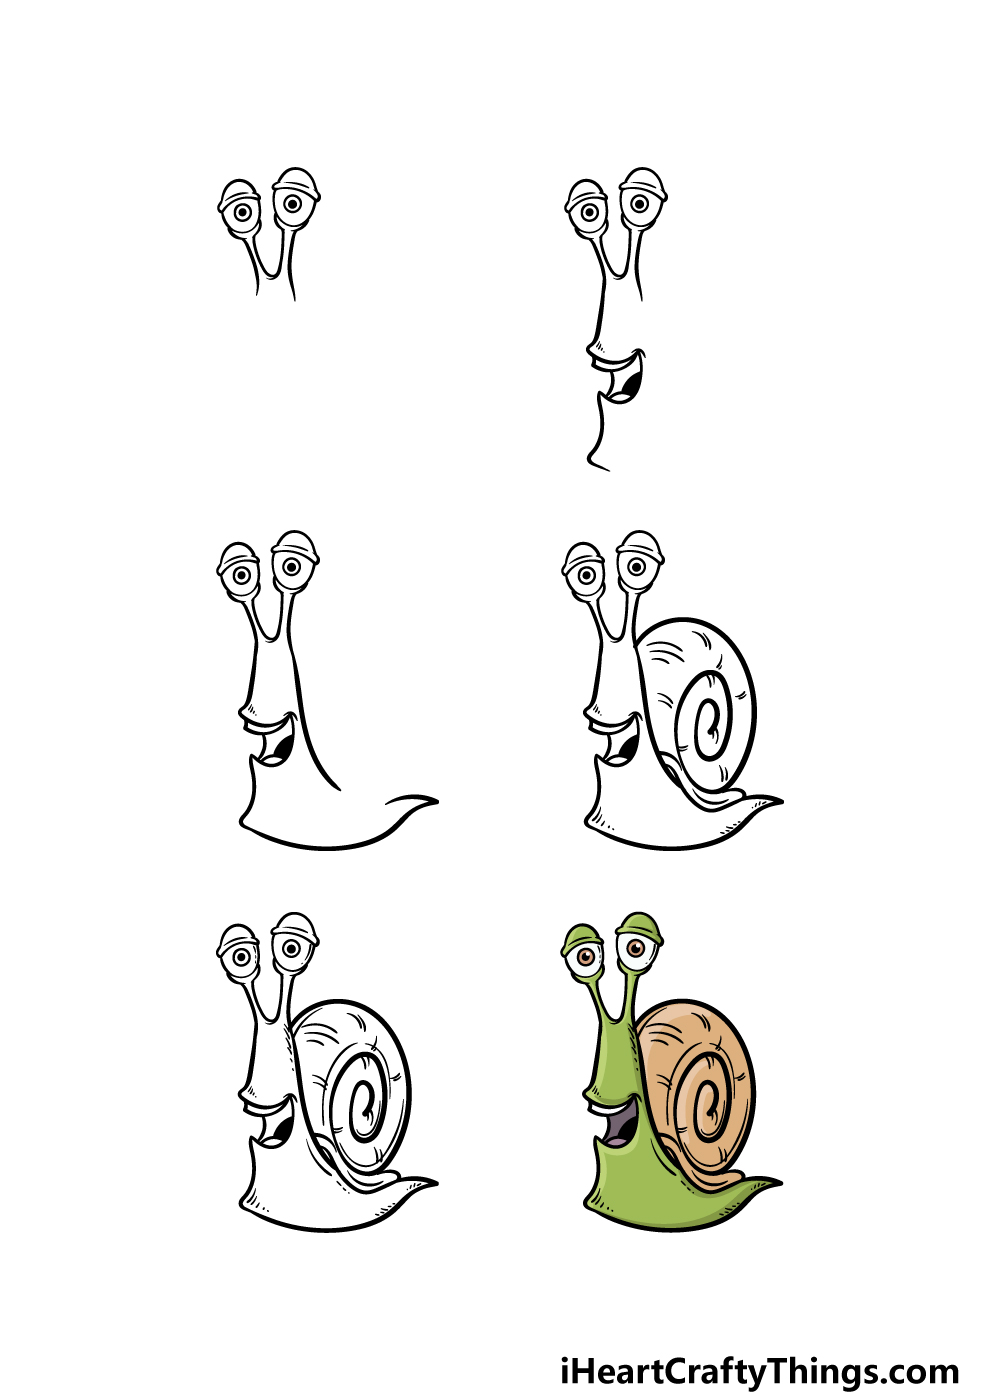 how to draw a cartoon snail in 6 steps